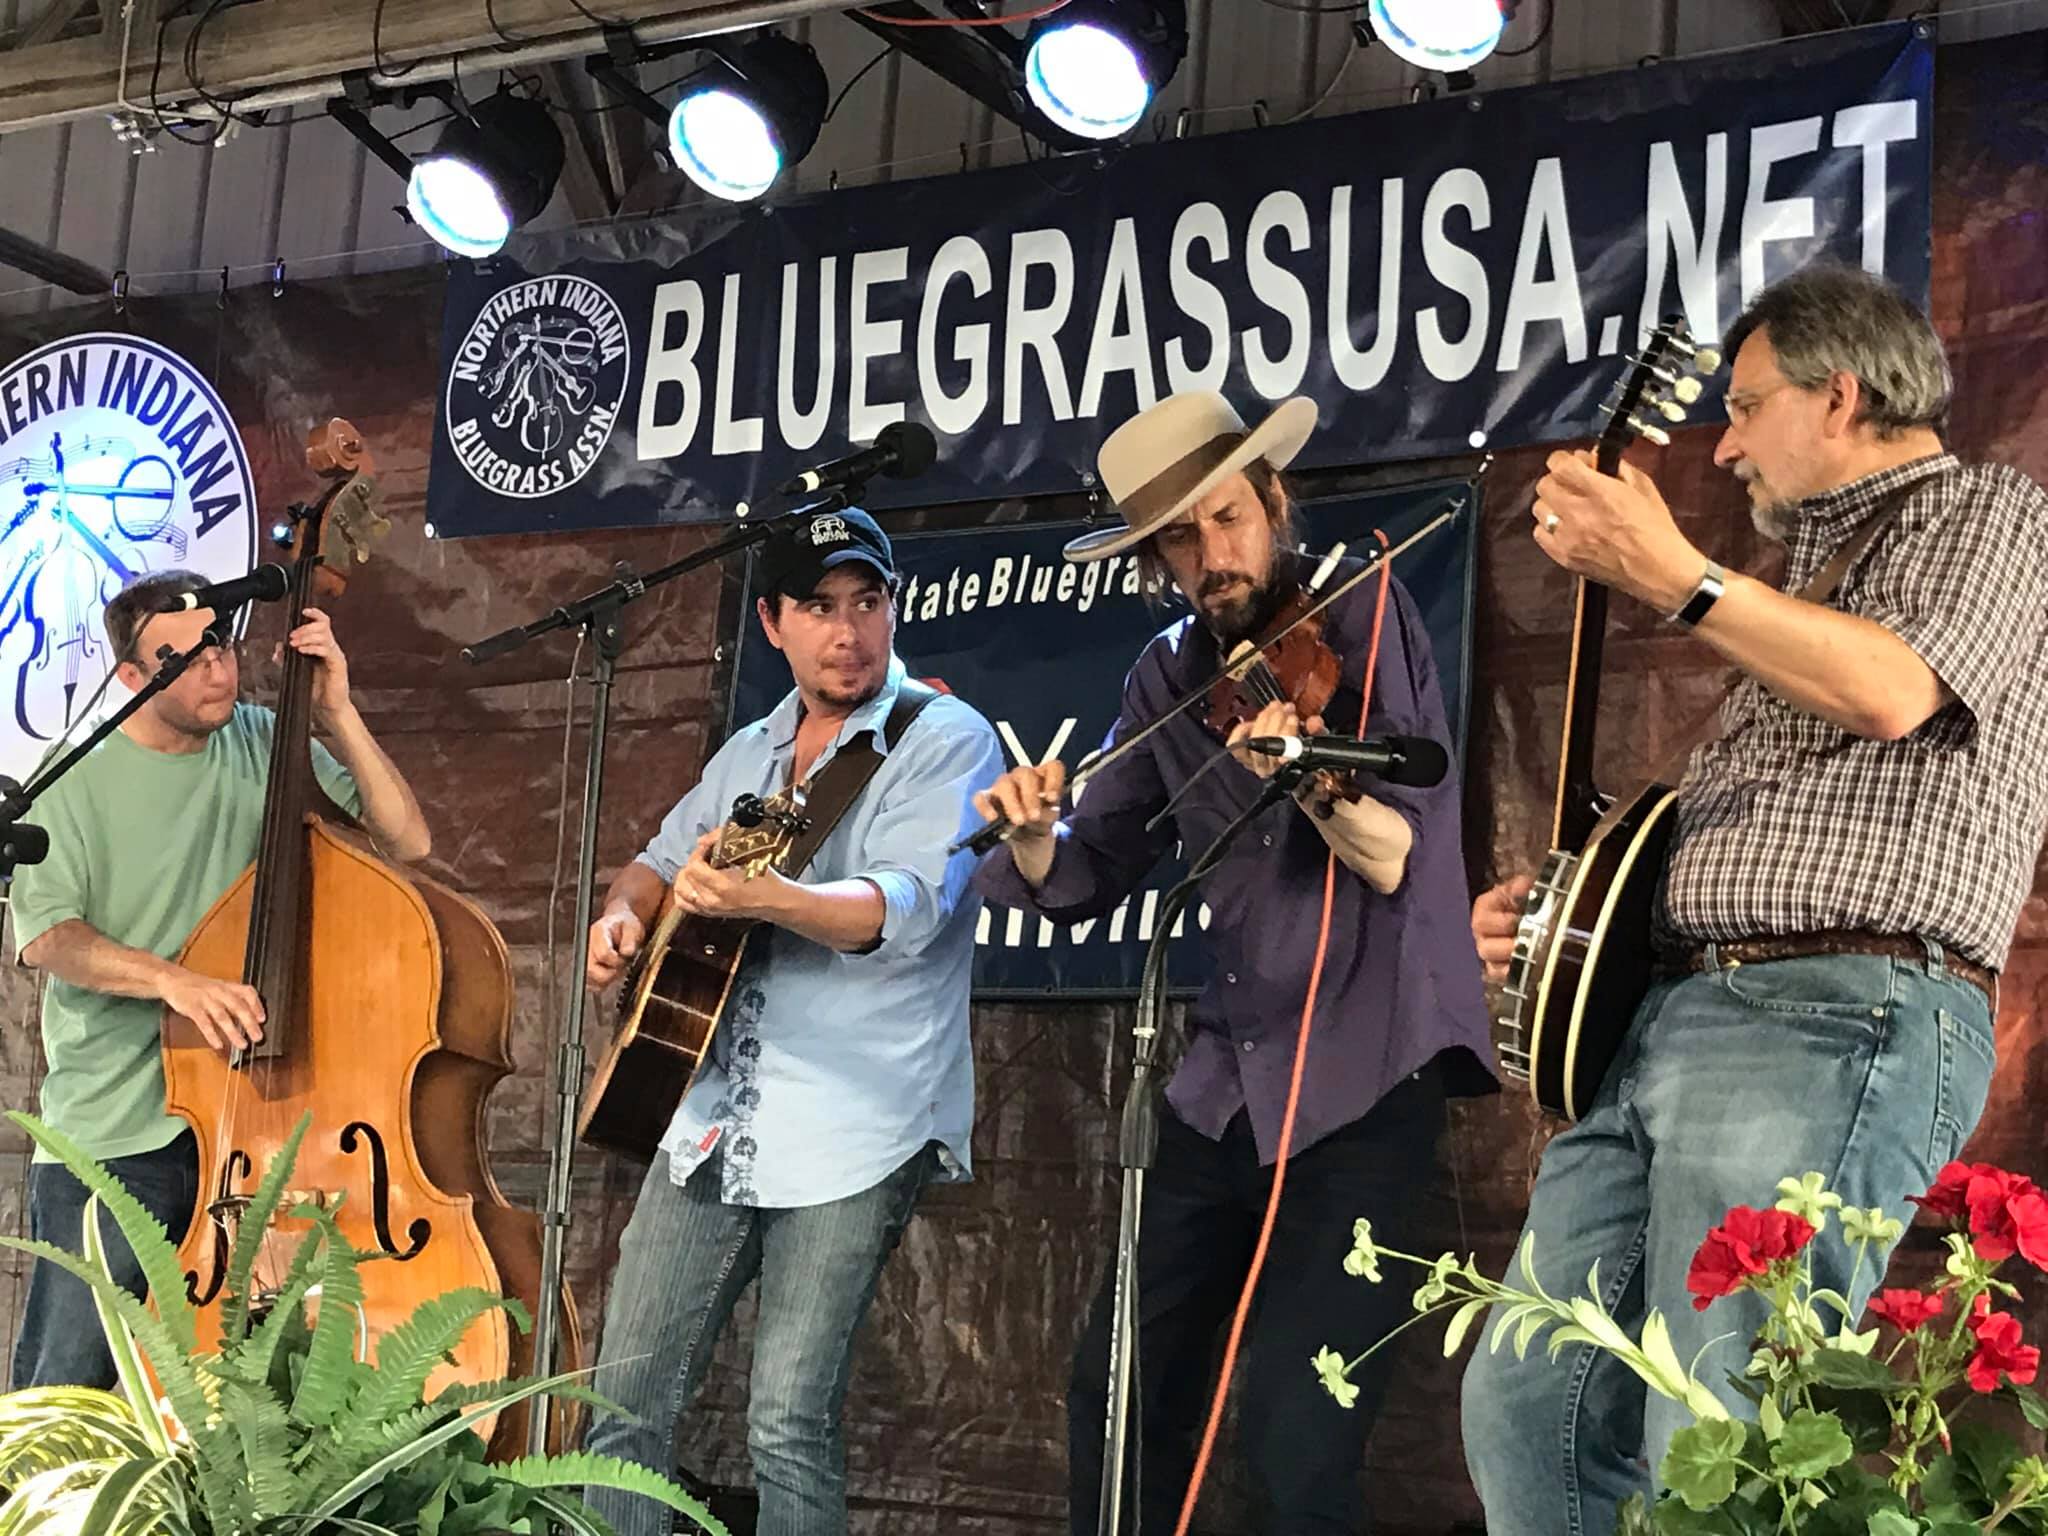 History of Music Festival in Fiddler's Grove and The Bluegrass Music